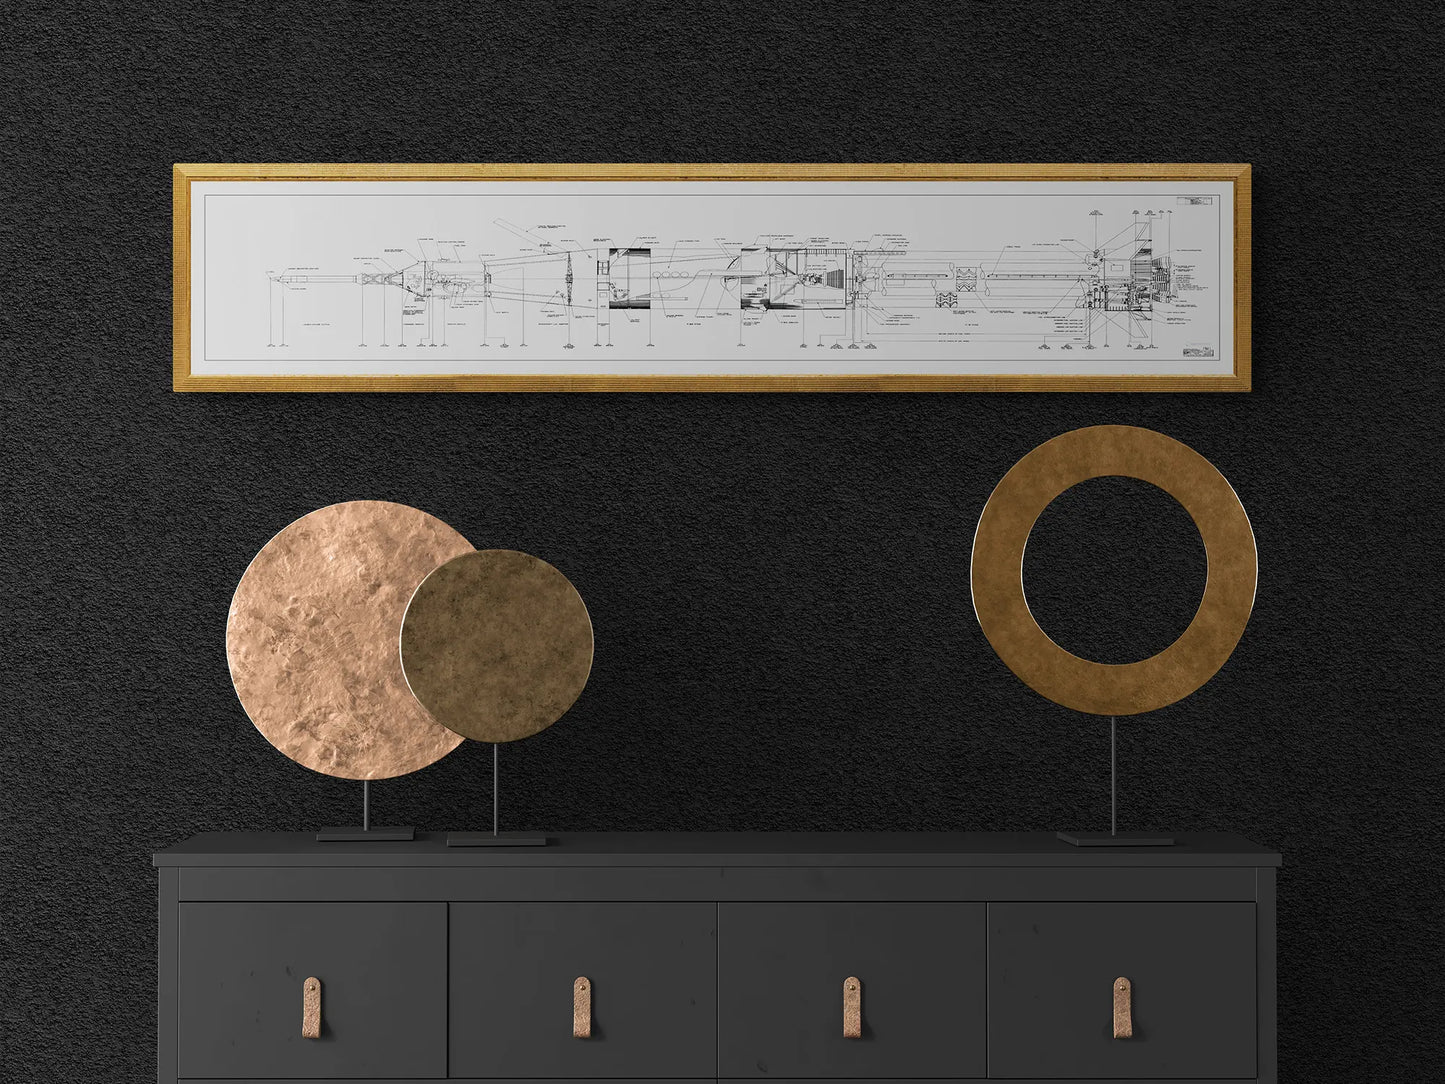 Apollo Saturn Blueprint | NASA posters | Technical blueprint diagram of an spacecraft | A minimalist interior featuring a black dresser with bronze handles. On top of the dresser are two circular metal sculptures, one solid and one with a central hole. Above the dresser, a gold-framed technical diagram of the NASA Saturn IB rocket is displayed against a dark textured wall.